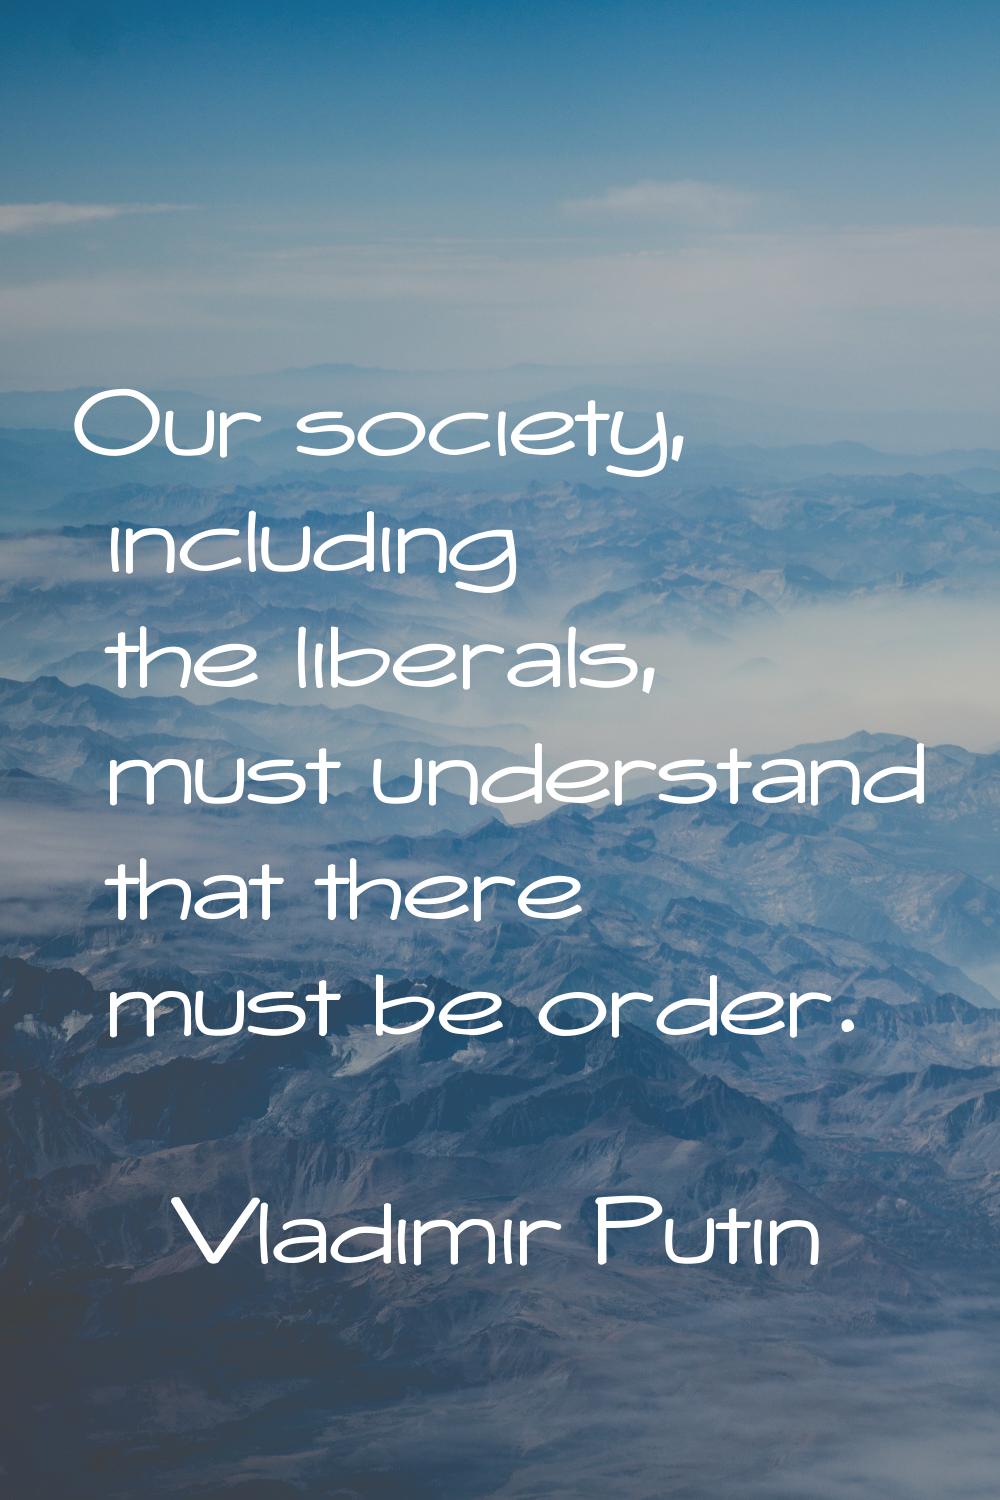 Our society, including the liberals, must understand that there must be order.